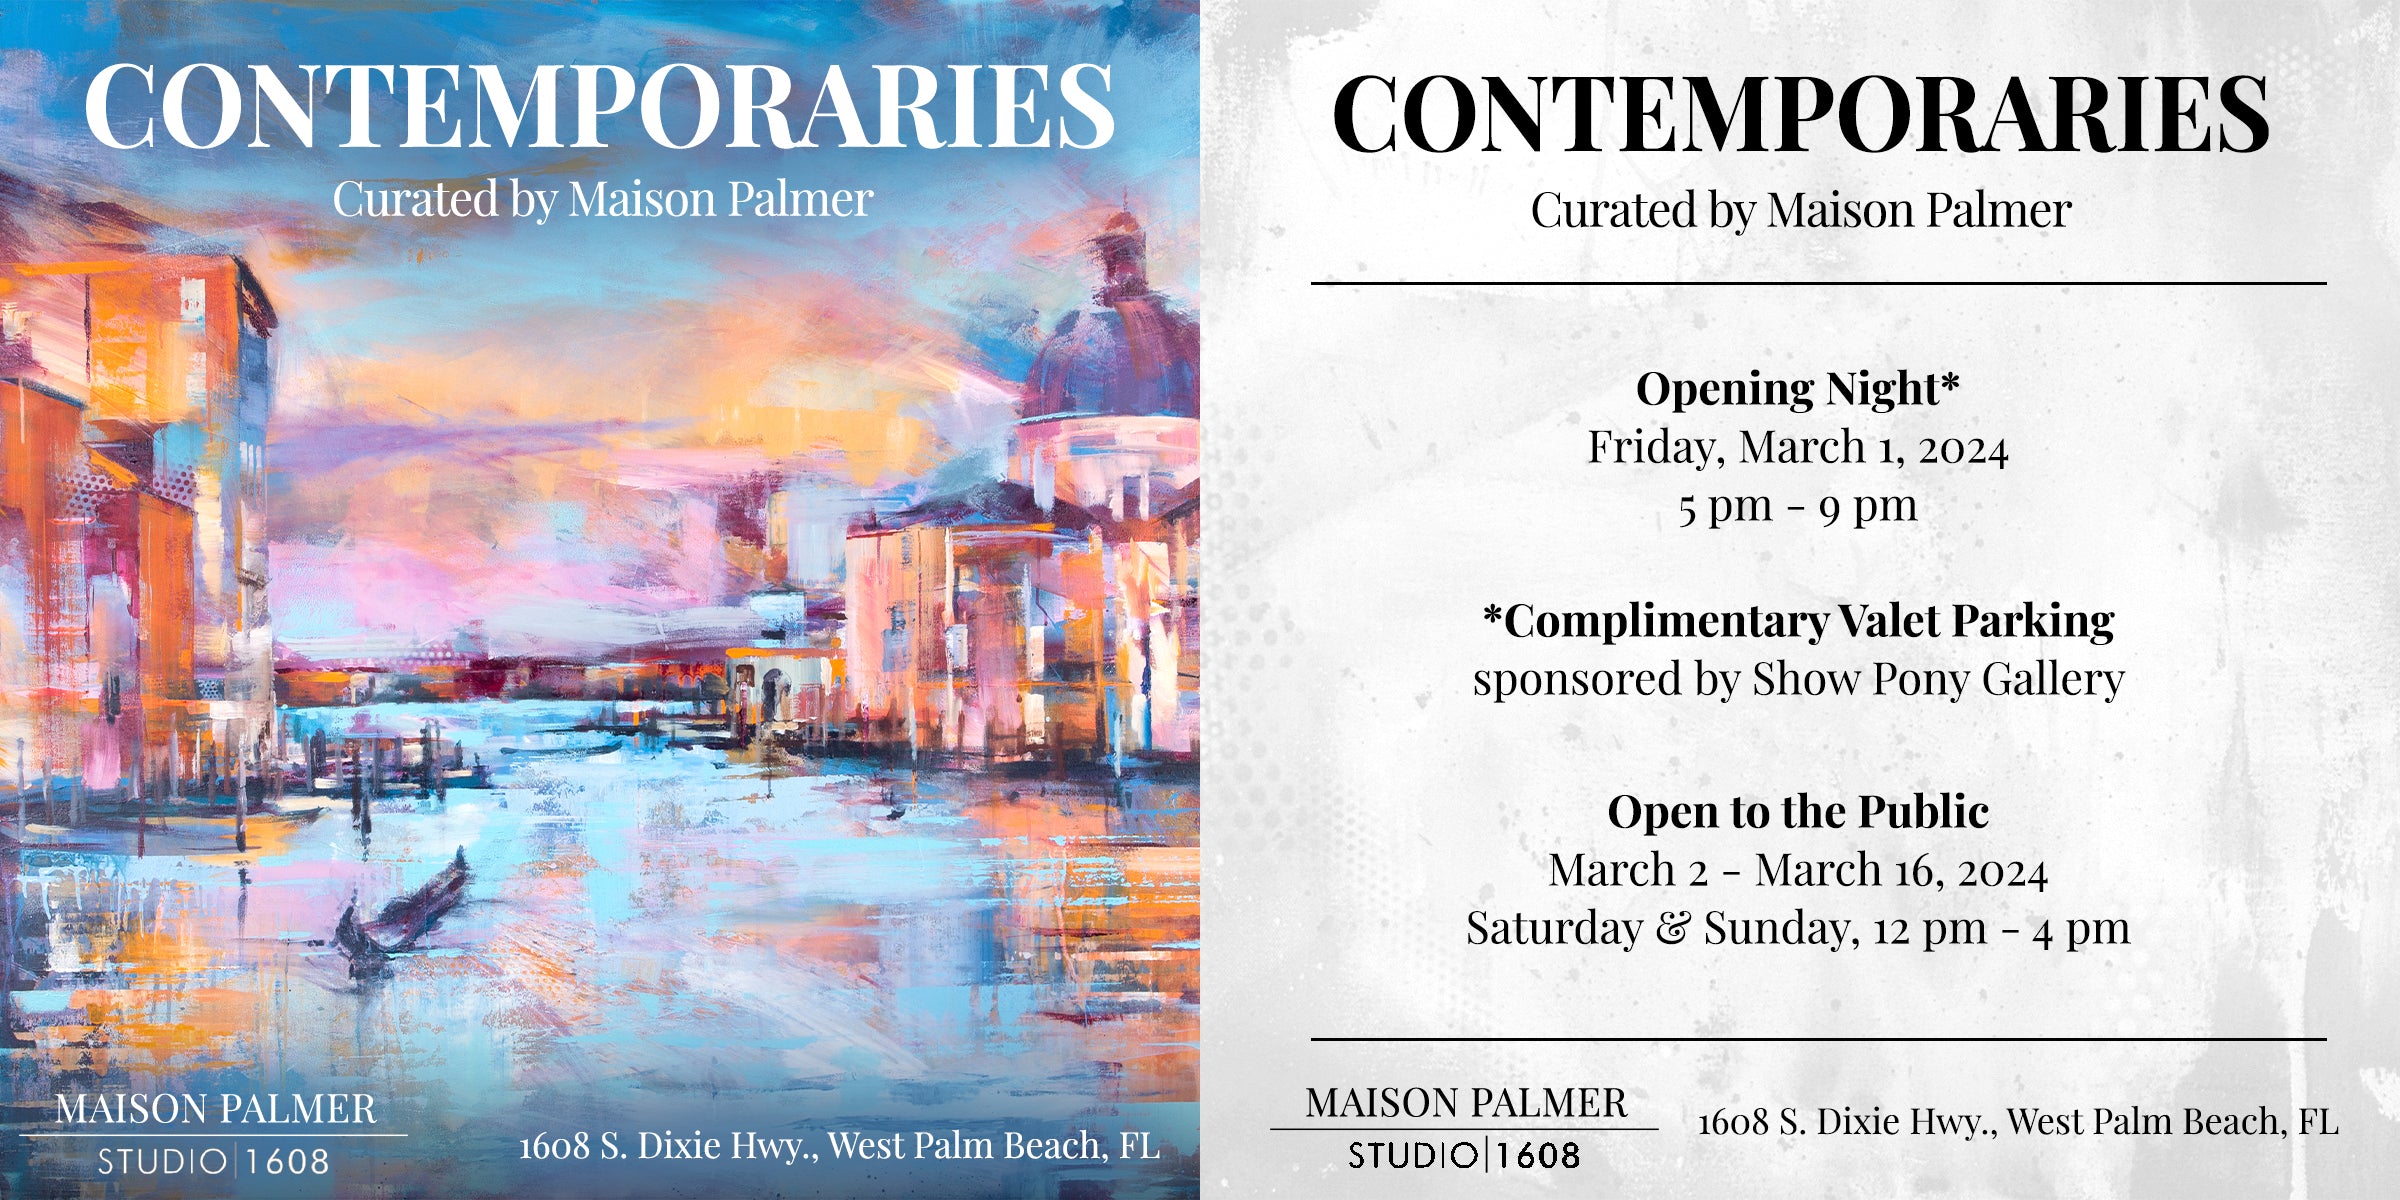 Contemporaries group art exhibition on March 1, 2024